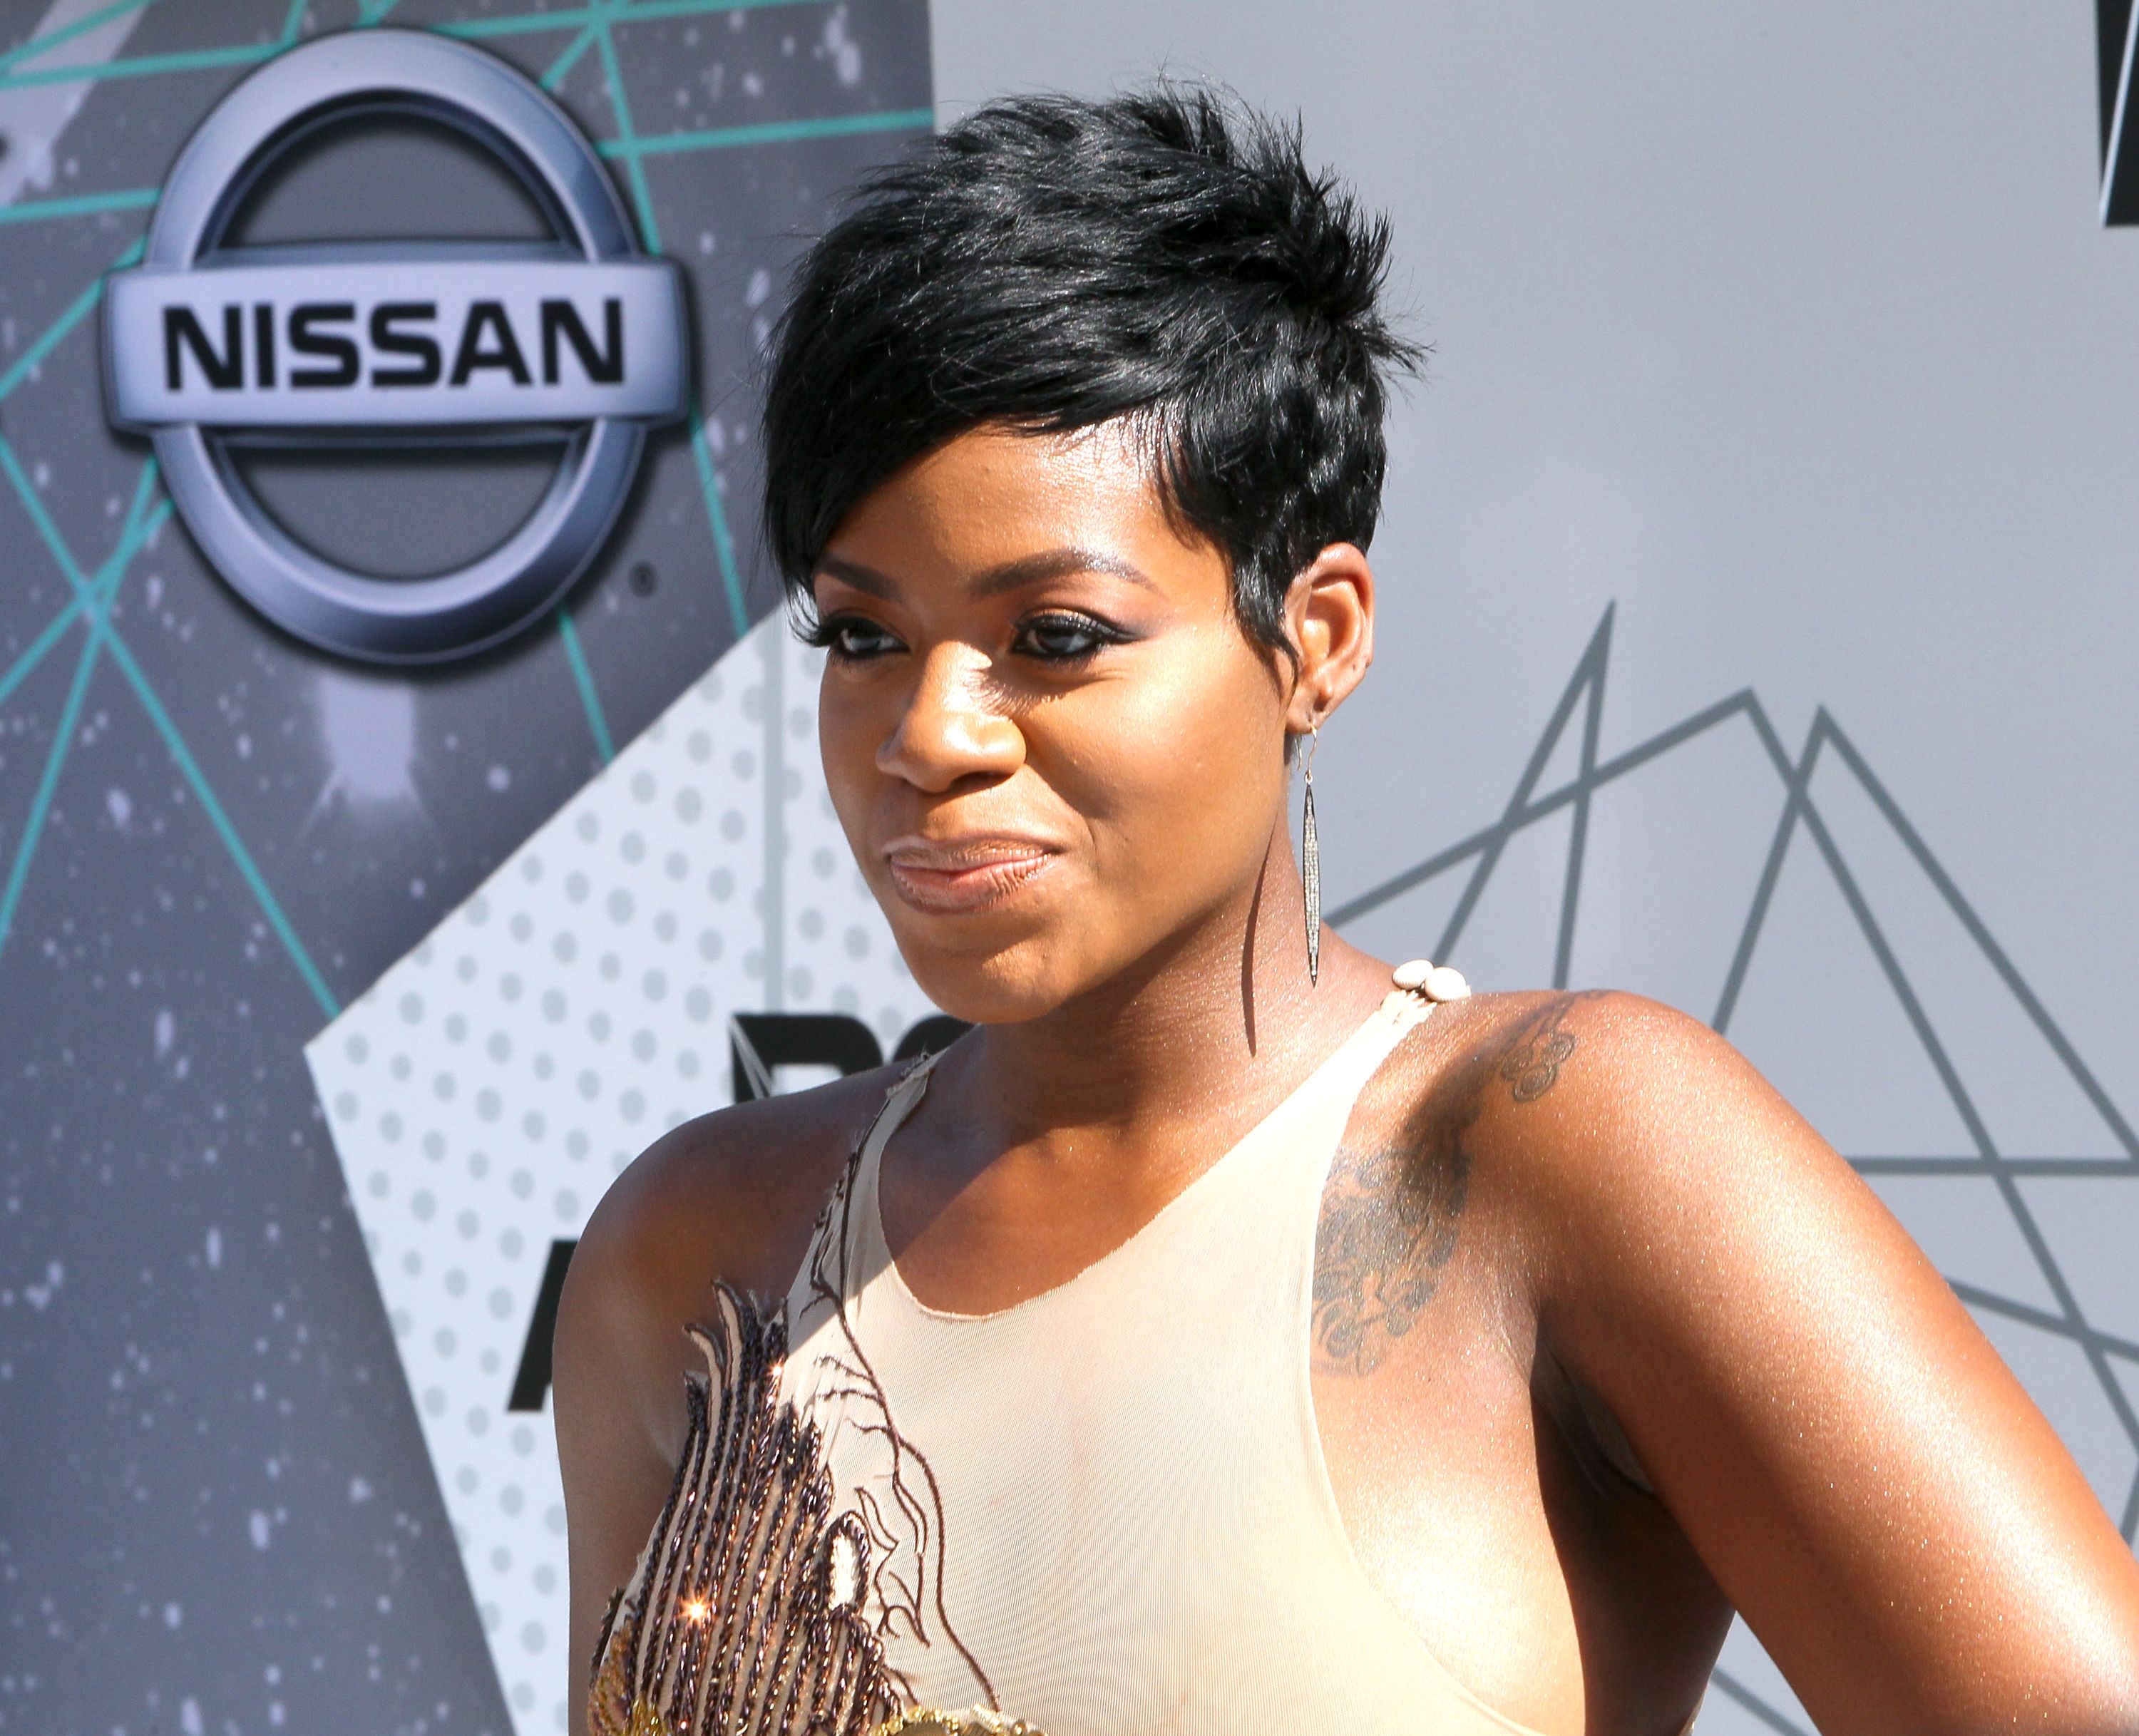 Check Out Fantasia Barrino in Front of a Lavish Car with Her Curves